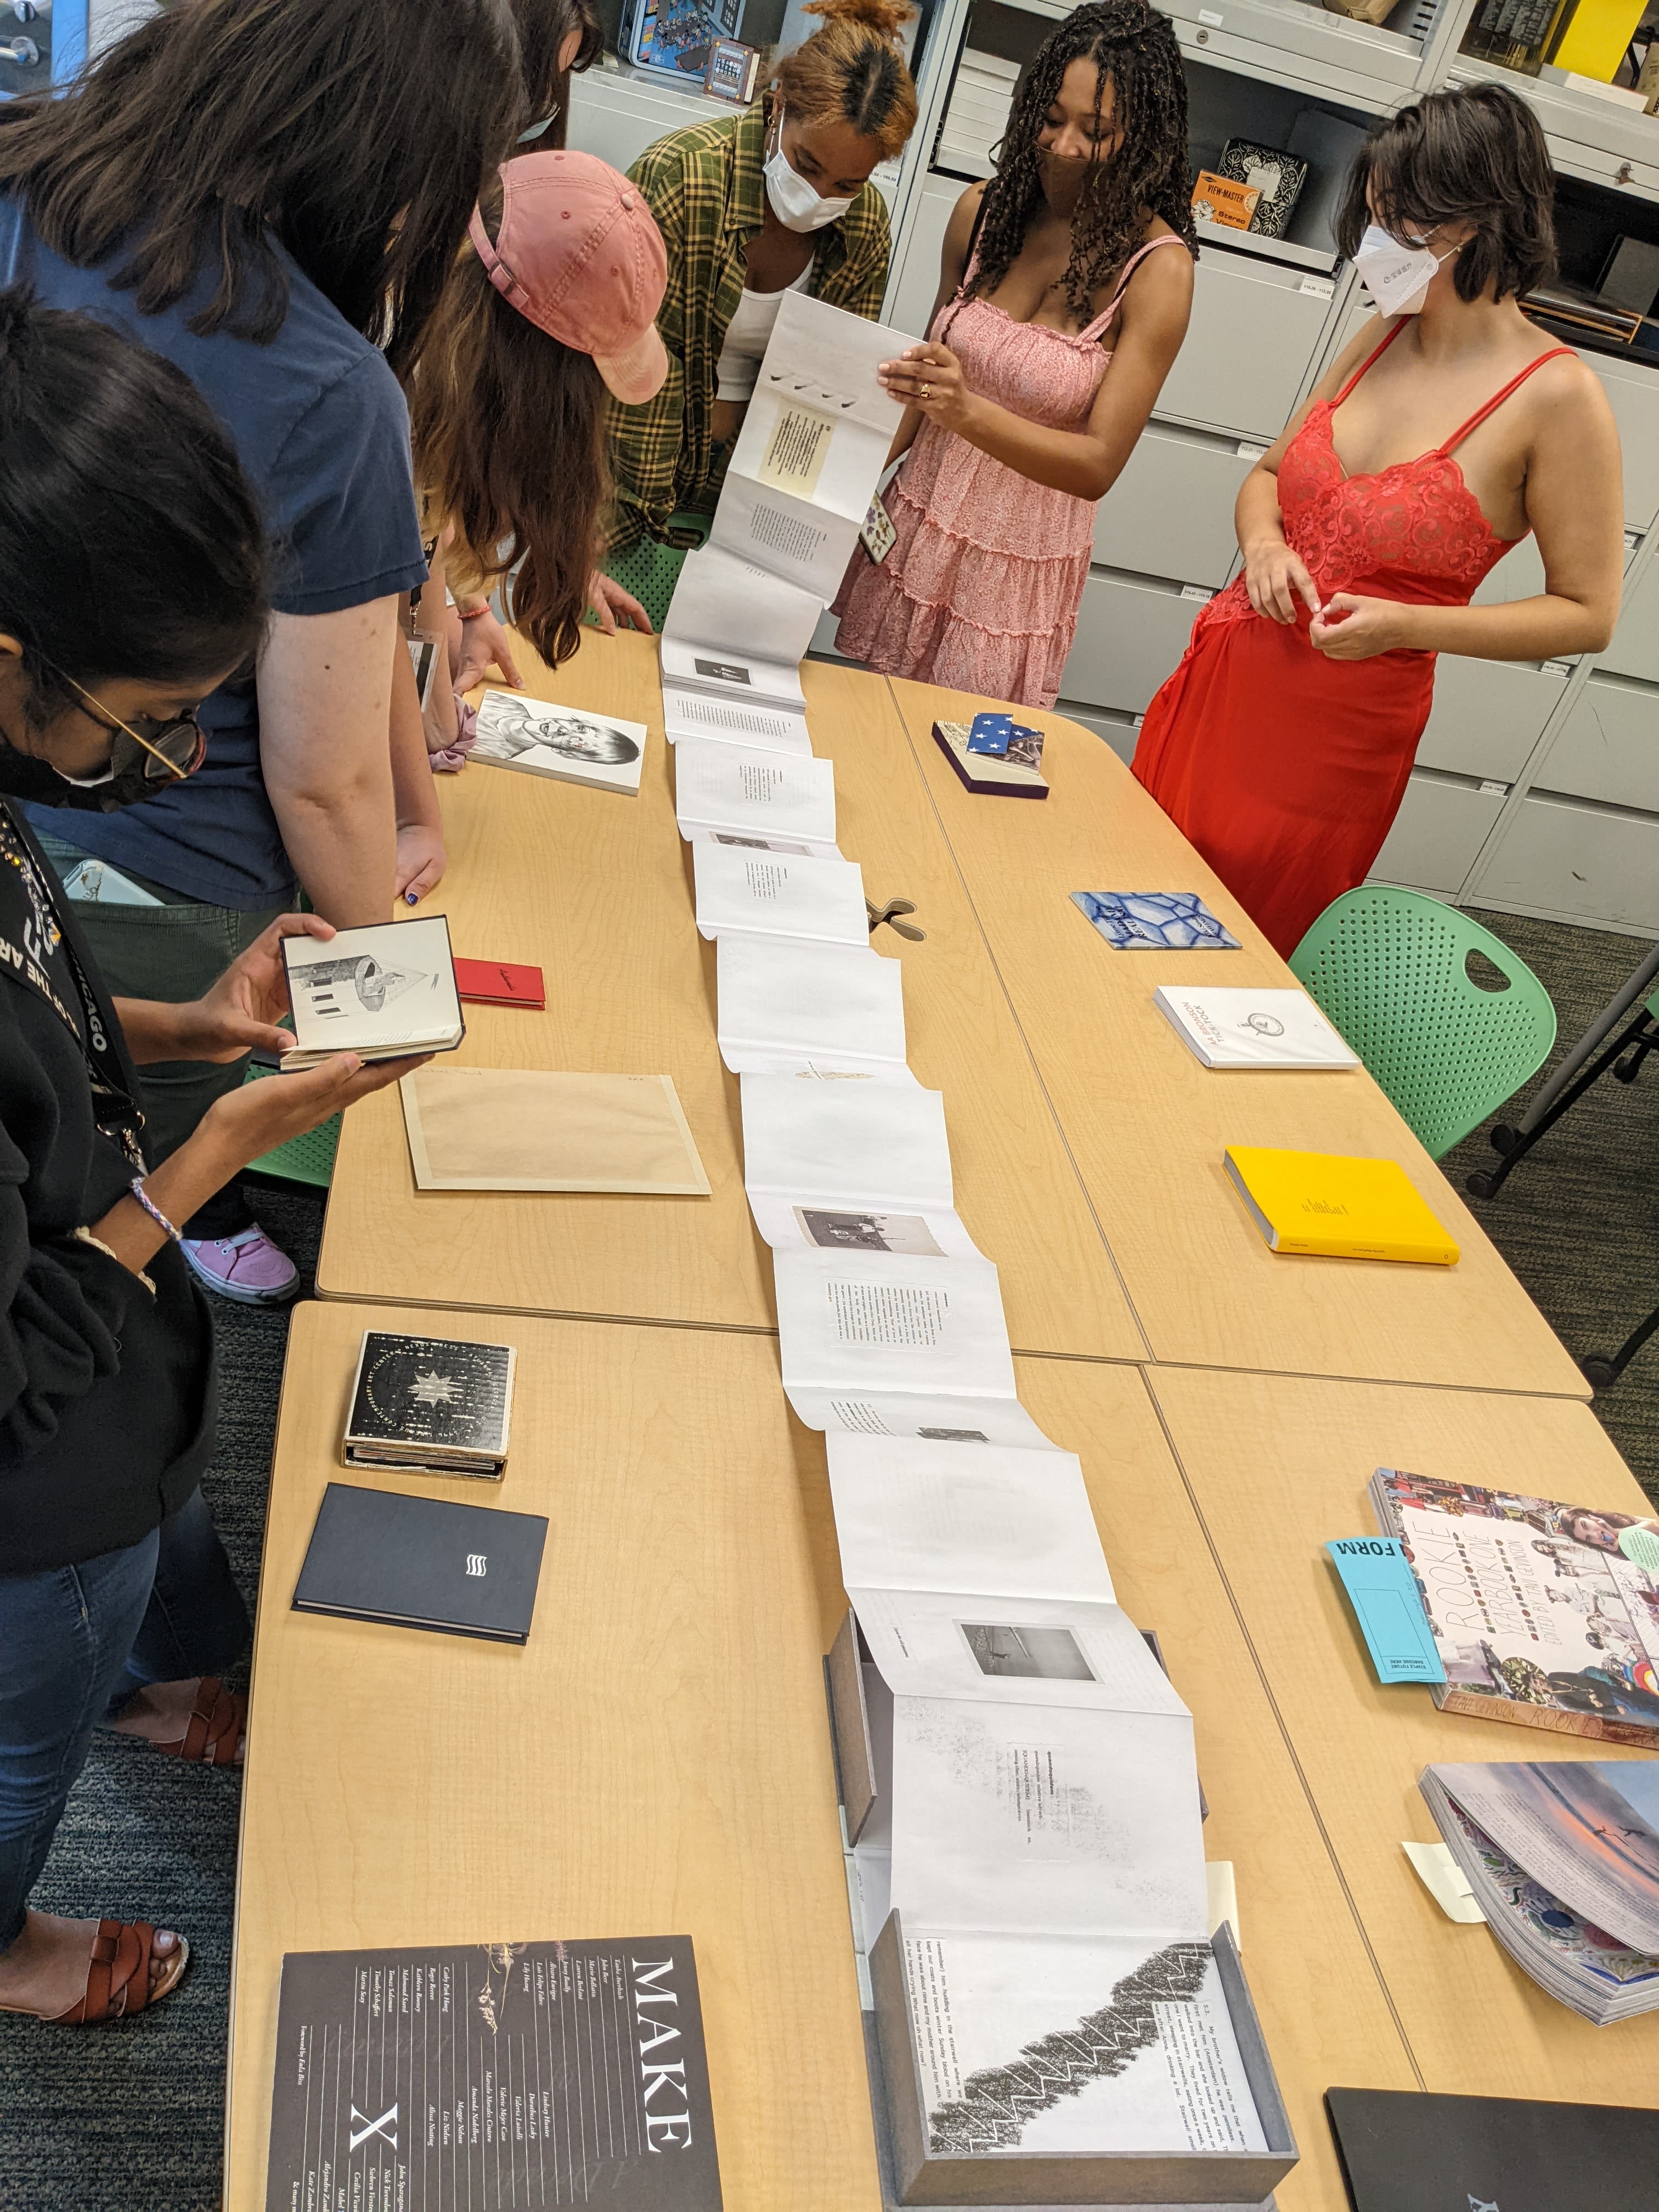 Students view a fold-out book on a table